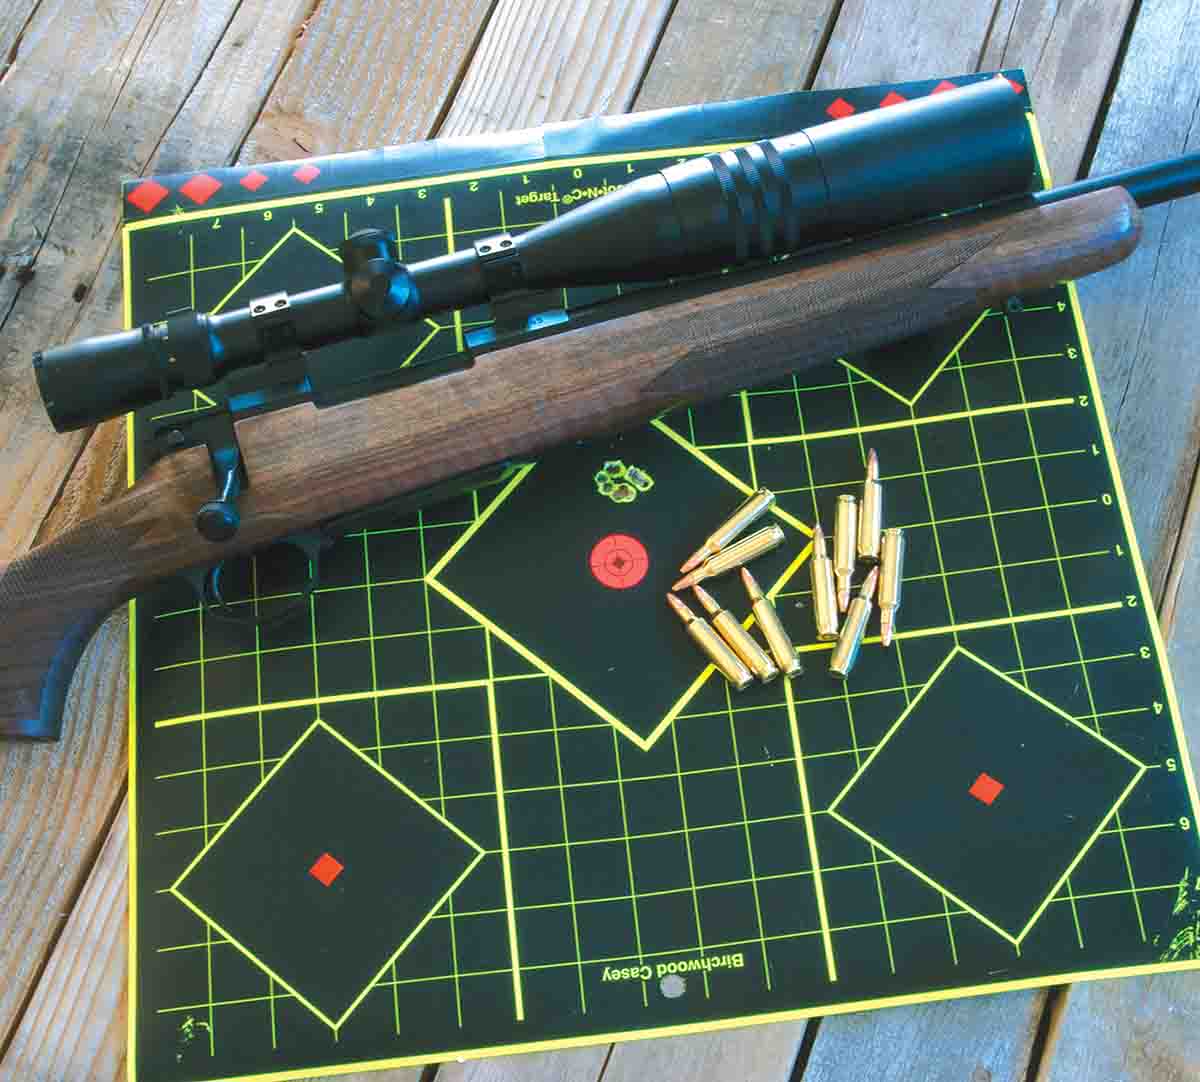 Nosler Varmageddon factory loads containing 62-grain flatbase hollowpoint bullets shot well in the Model 48 Heritage .22 Nosler test rifle. Shown is a 100-yard, 10-shot group.